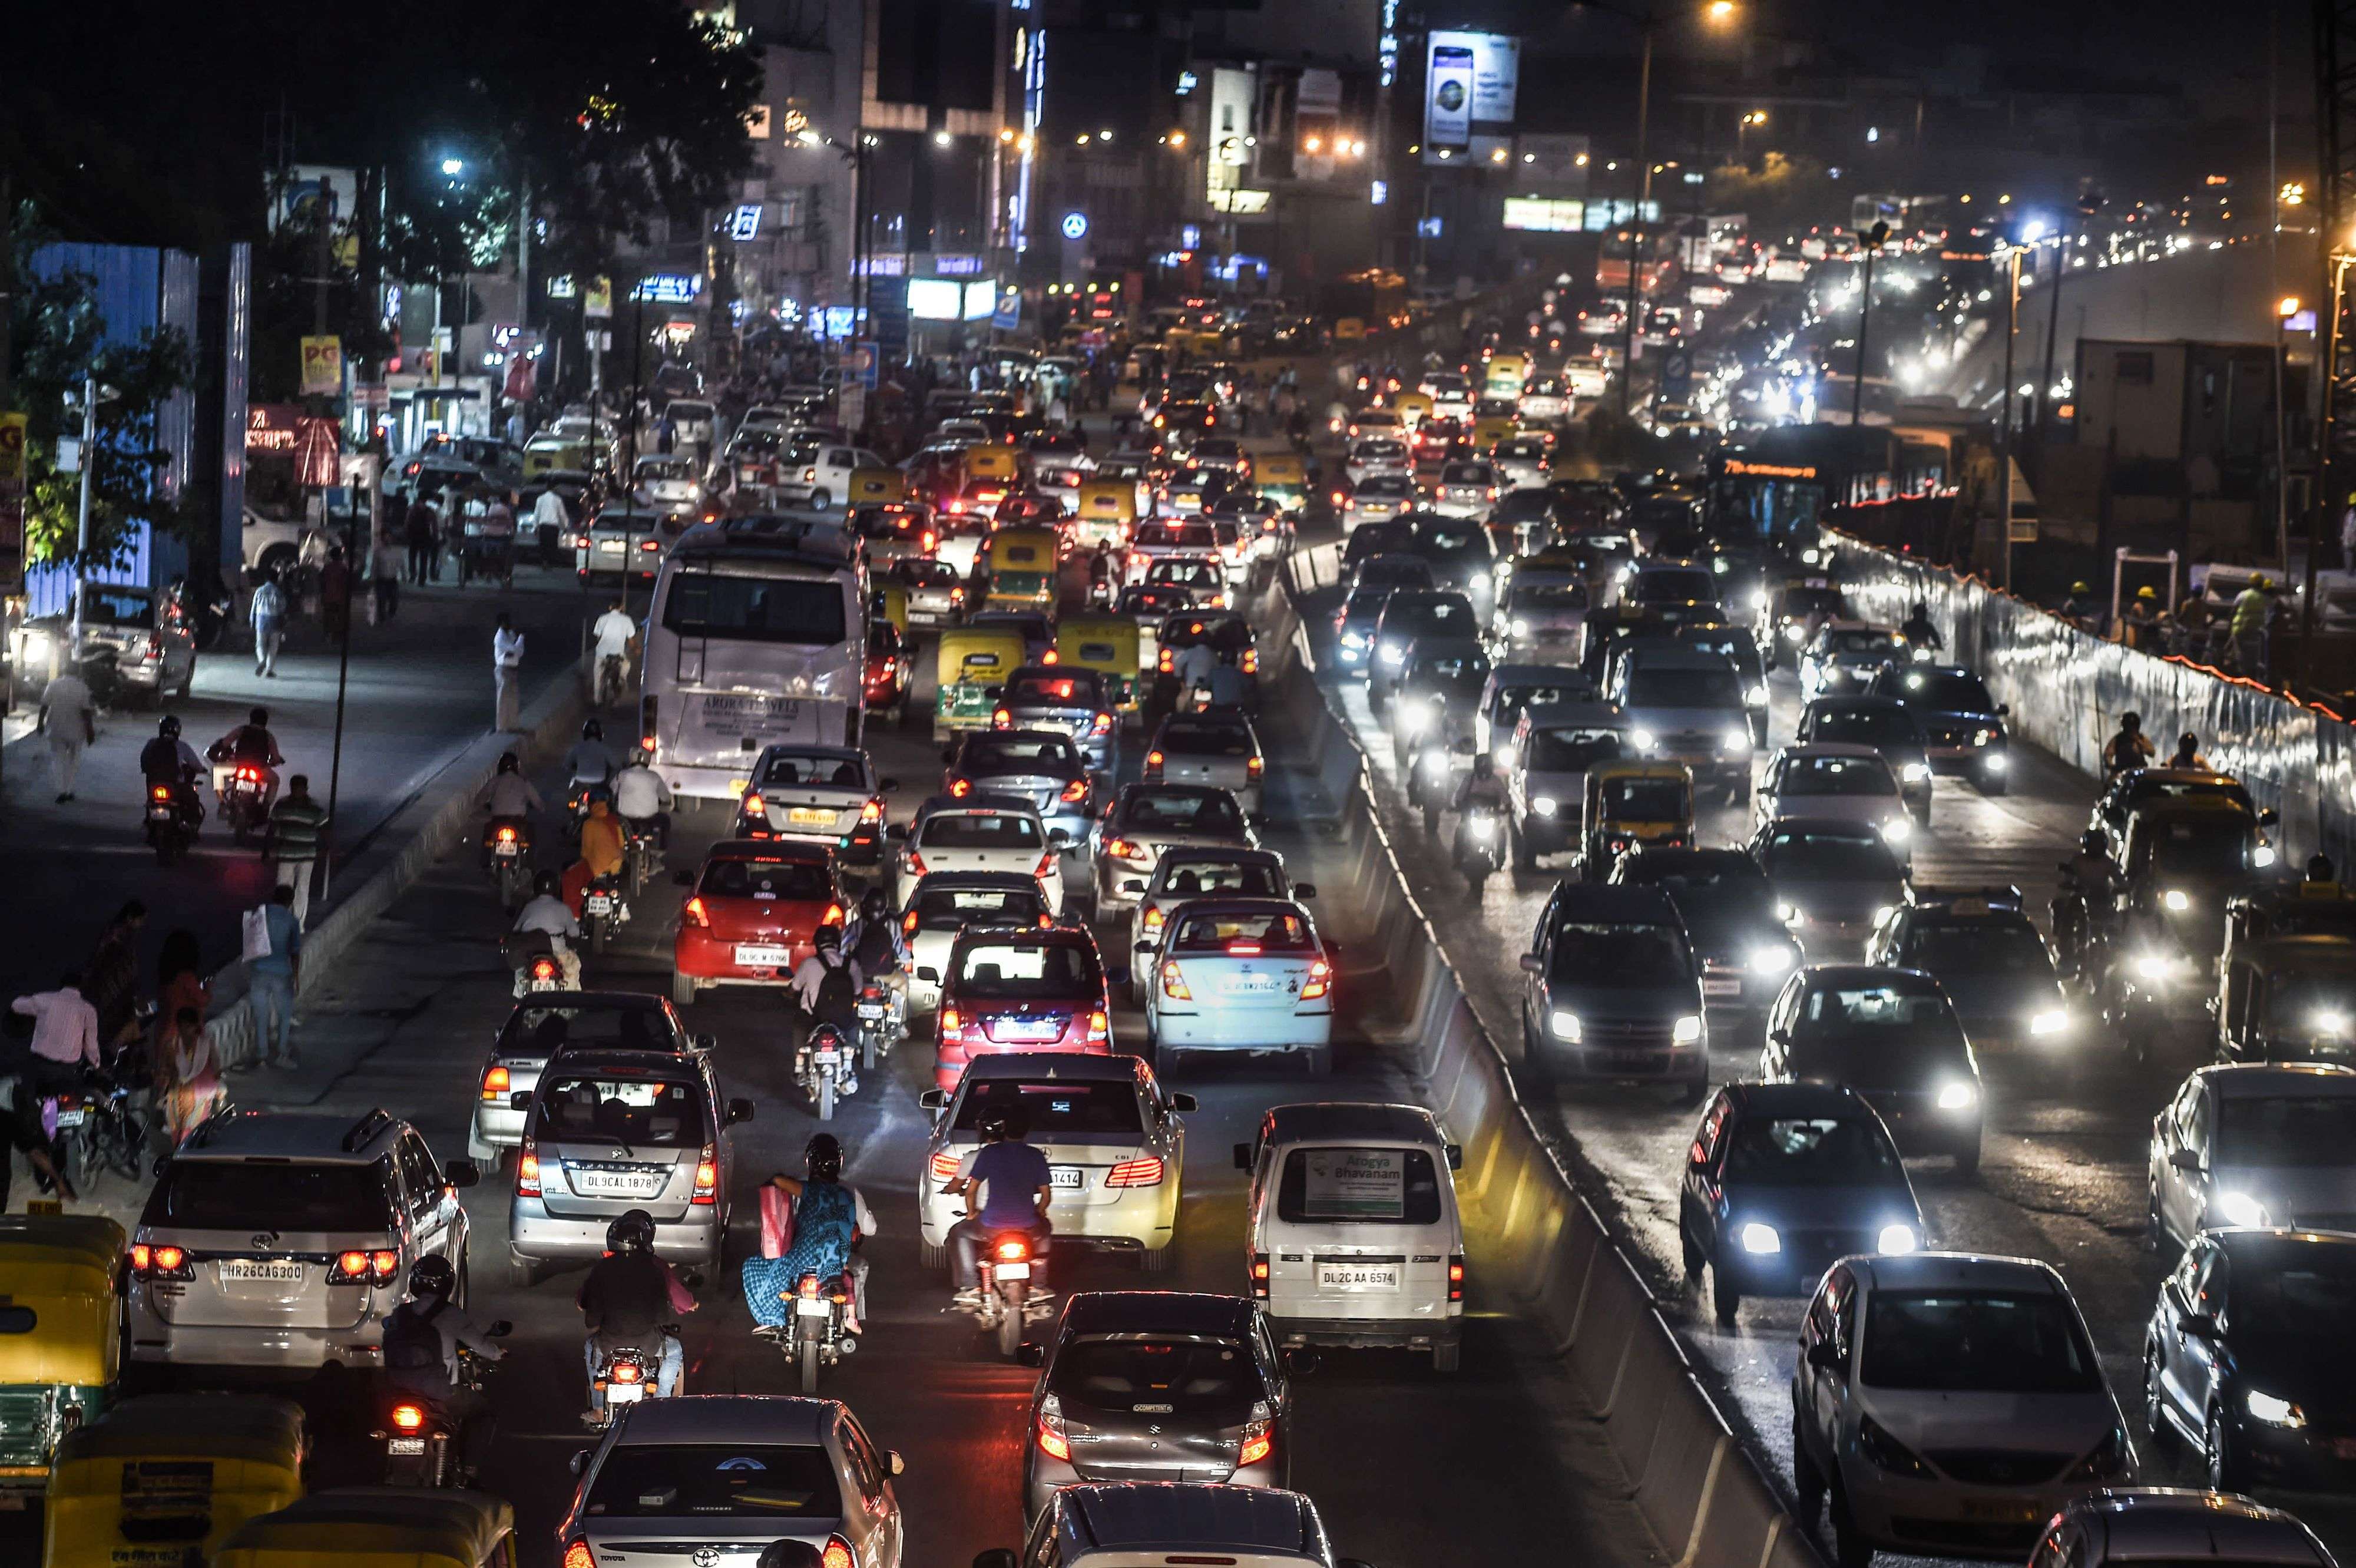 (FILES) In this photograph taken on October 15, 2015, a stream of cars backs up on an exit to a highway in New Delhi.  India's top court December 16, 2015 imposed a temporary ban on new diesel-guzzling SUVs and other luxury cars in New Delhi in an attempt to clean up the world's most polluted capital.  AFP PHOTO / ROBERTO SCHMIDT / FILES